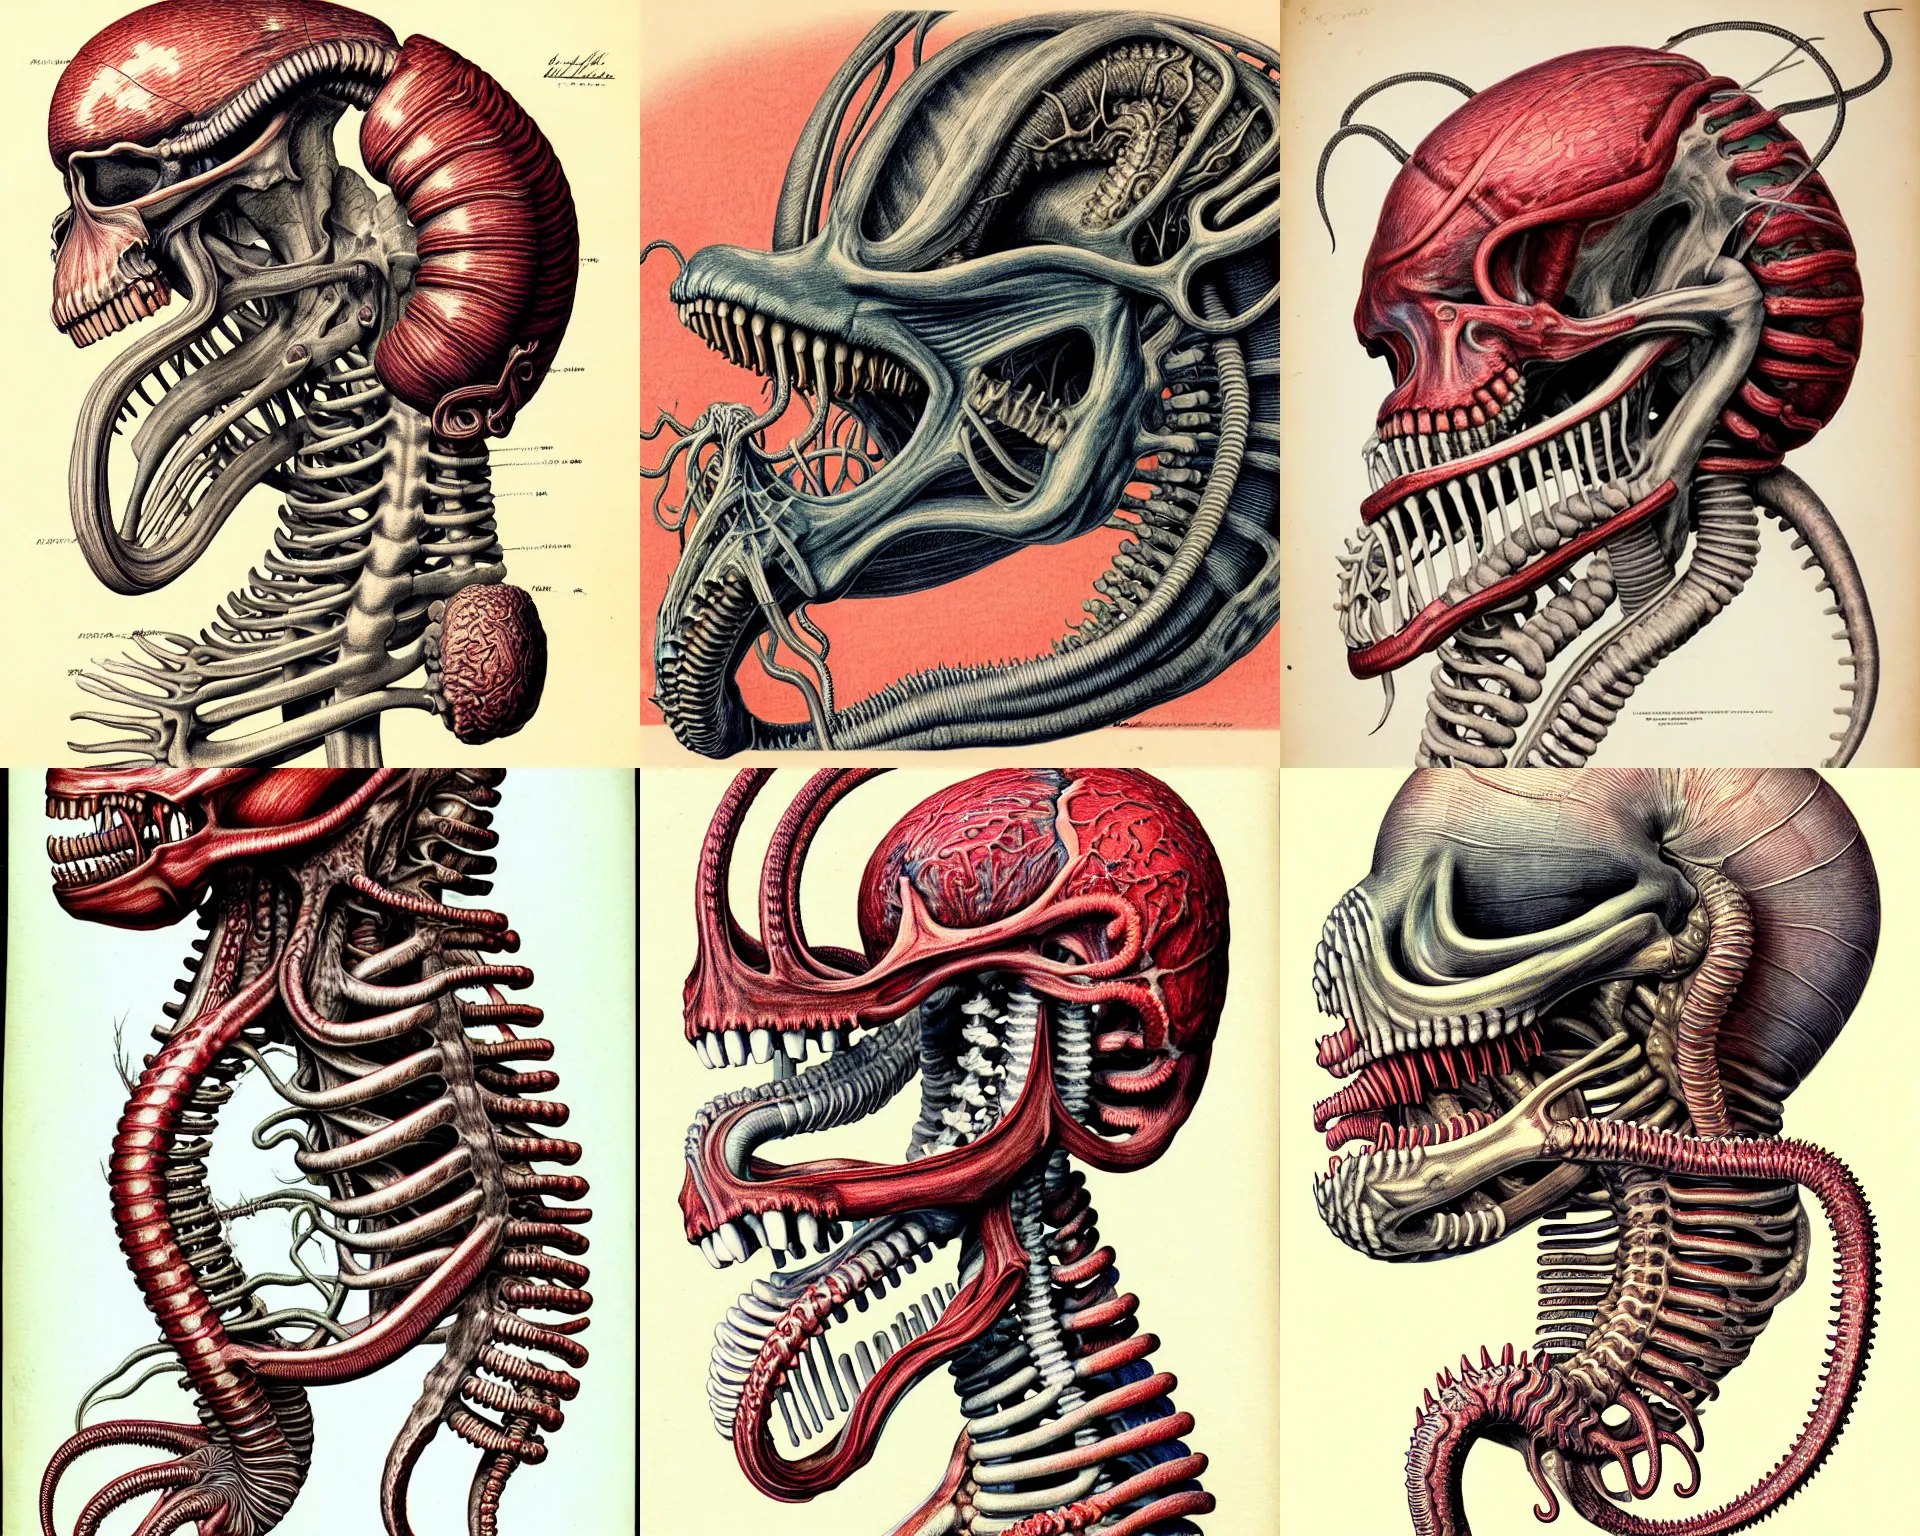 Prompt: hyper-detailed color pencil antique medical illustration of Kaiju head cross-section, nautilus brain, ribcage, xenomorph, with tentacles coming out of open mouth and exposed jaw bone, cervical spinal column, vertebra, arteries, cerebral corpus callosum, interventricular foramen, symmetrical